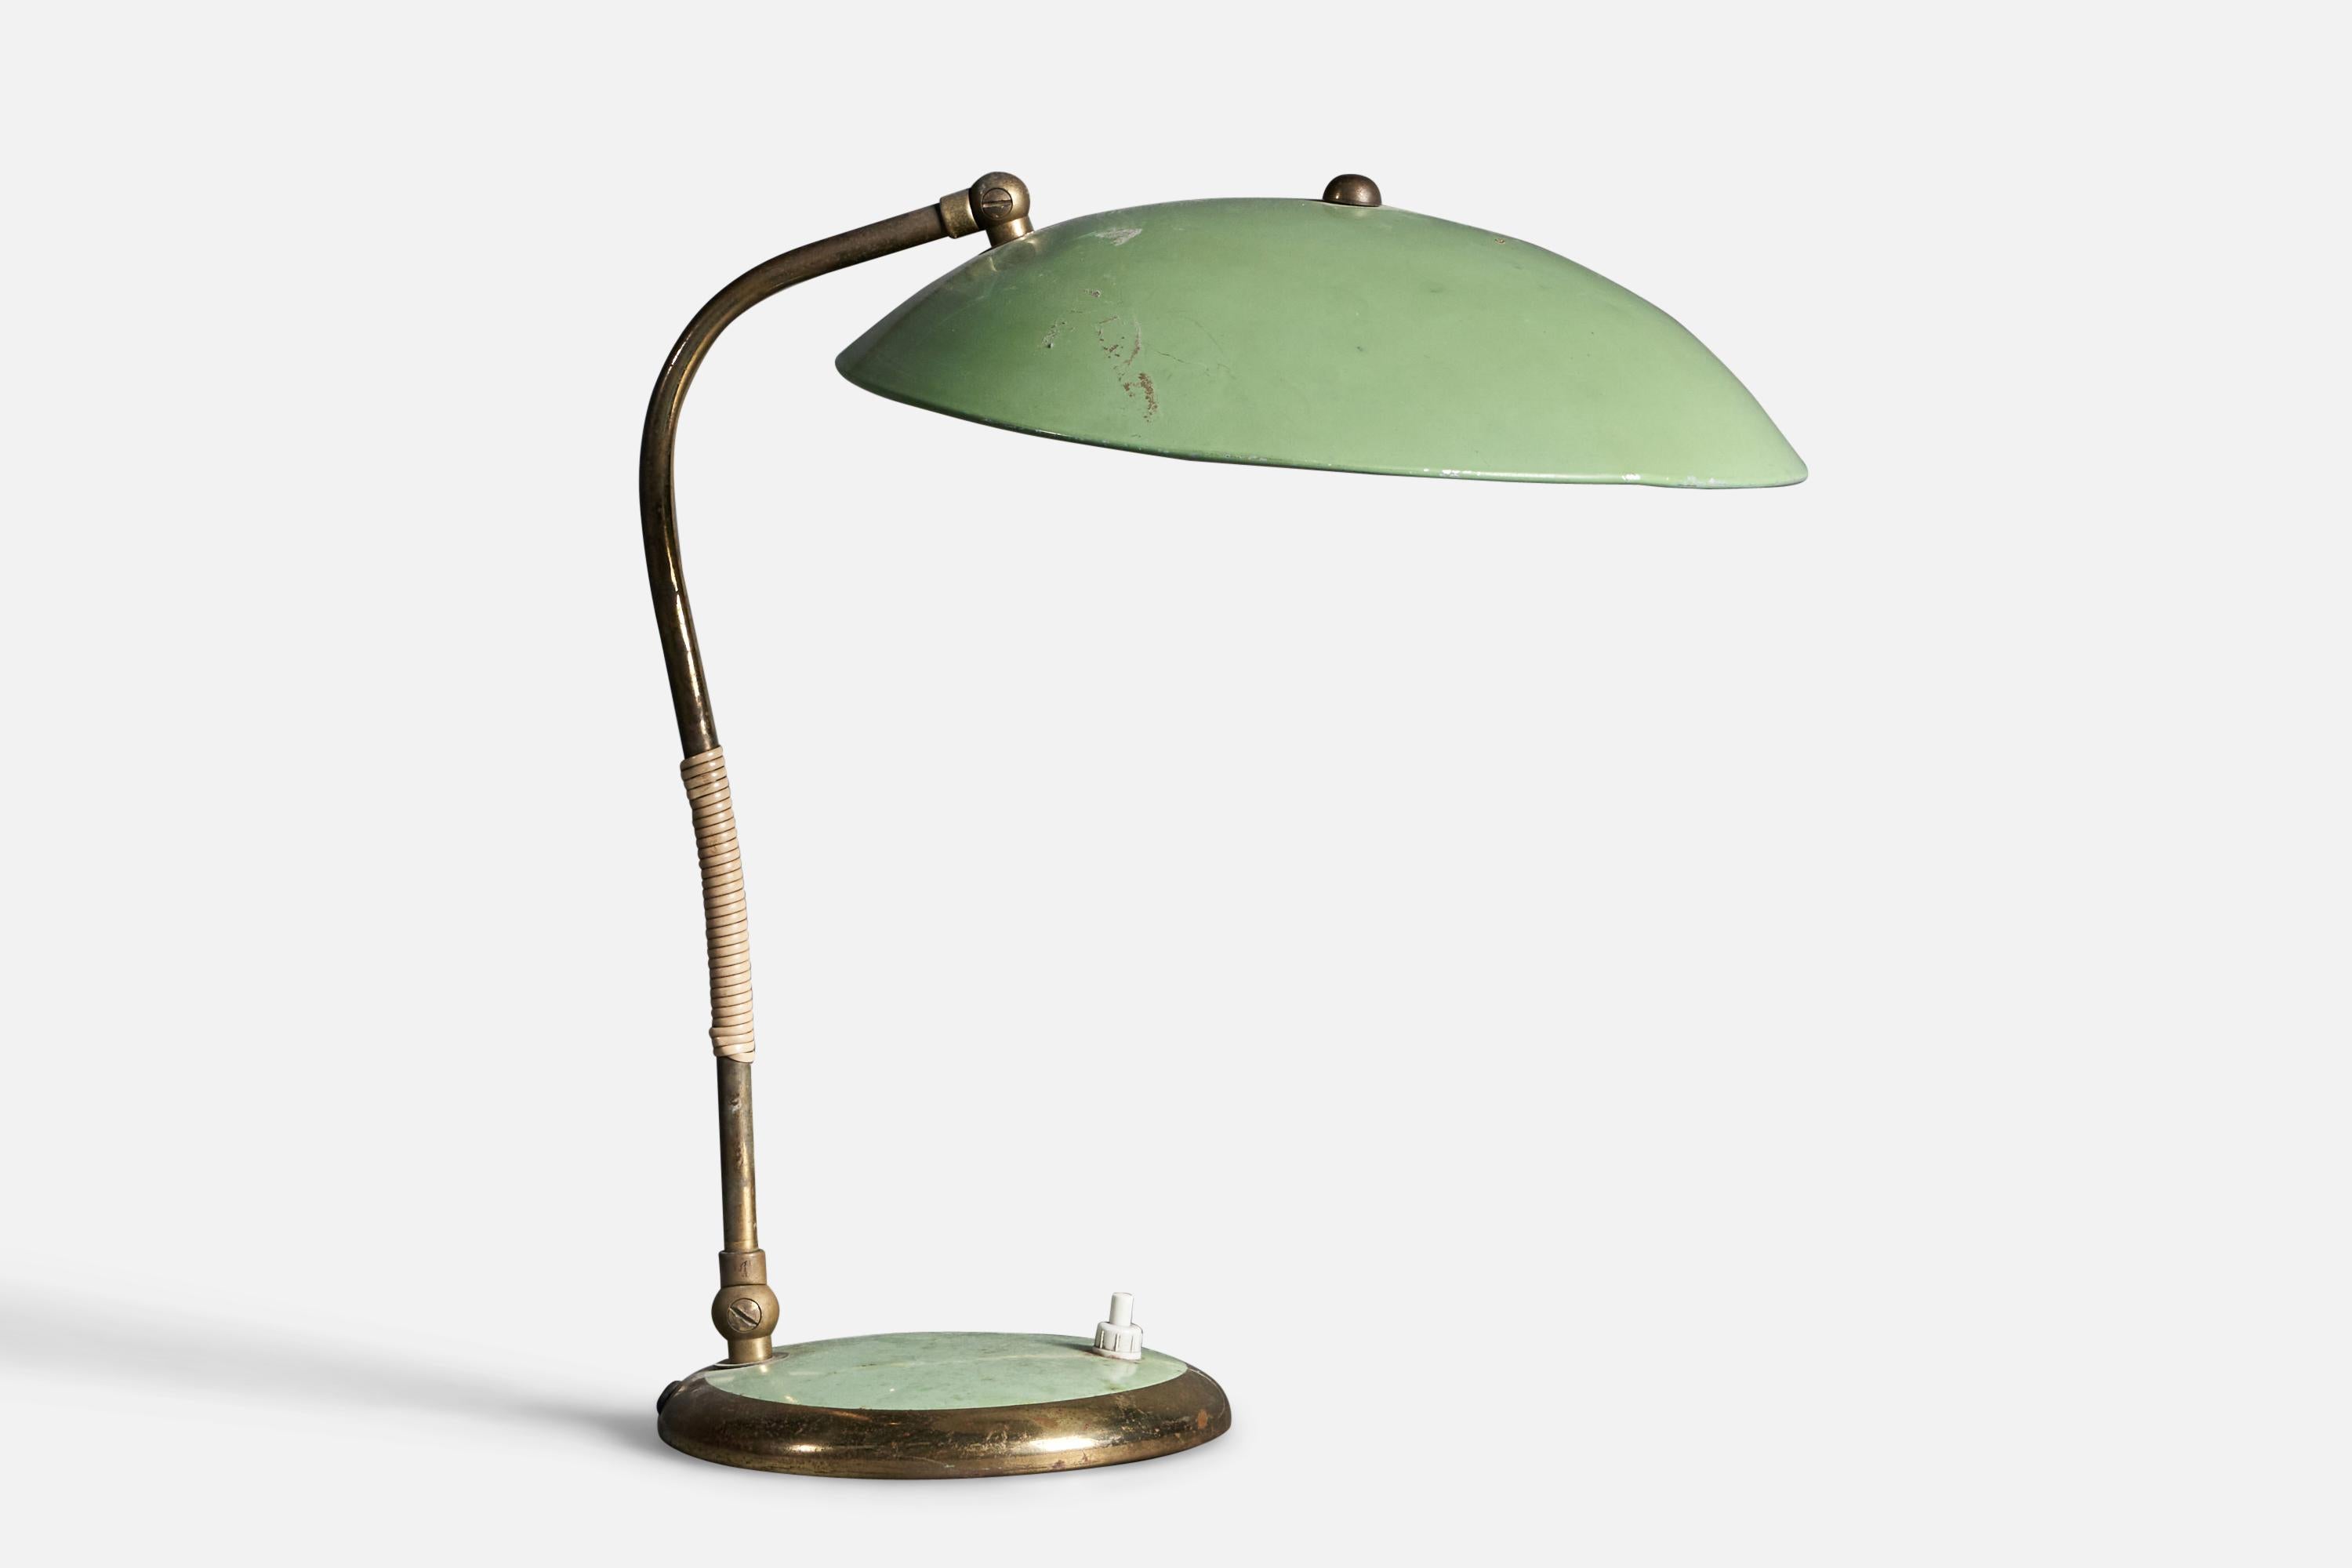 An adjustable table lamp / desk light. Germany, 1950s.

Features brass and green-lacquered metal.

